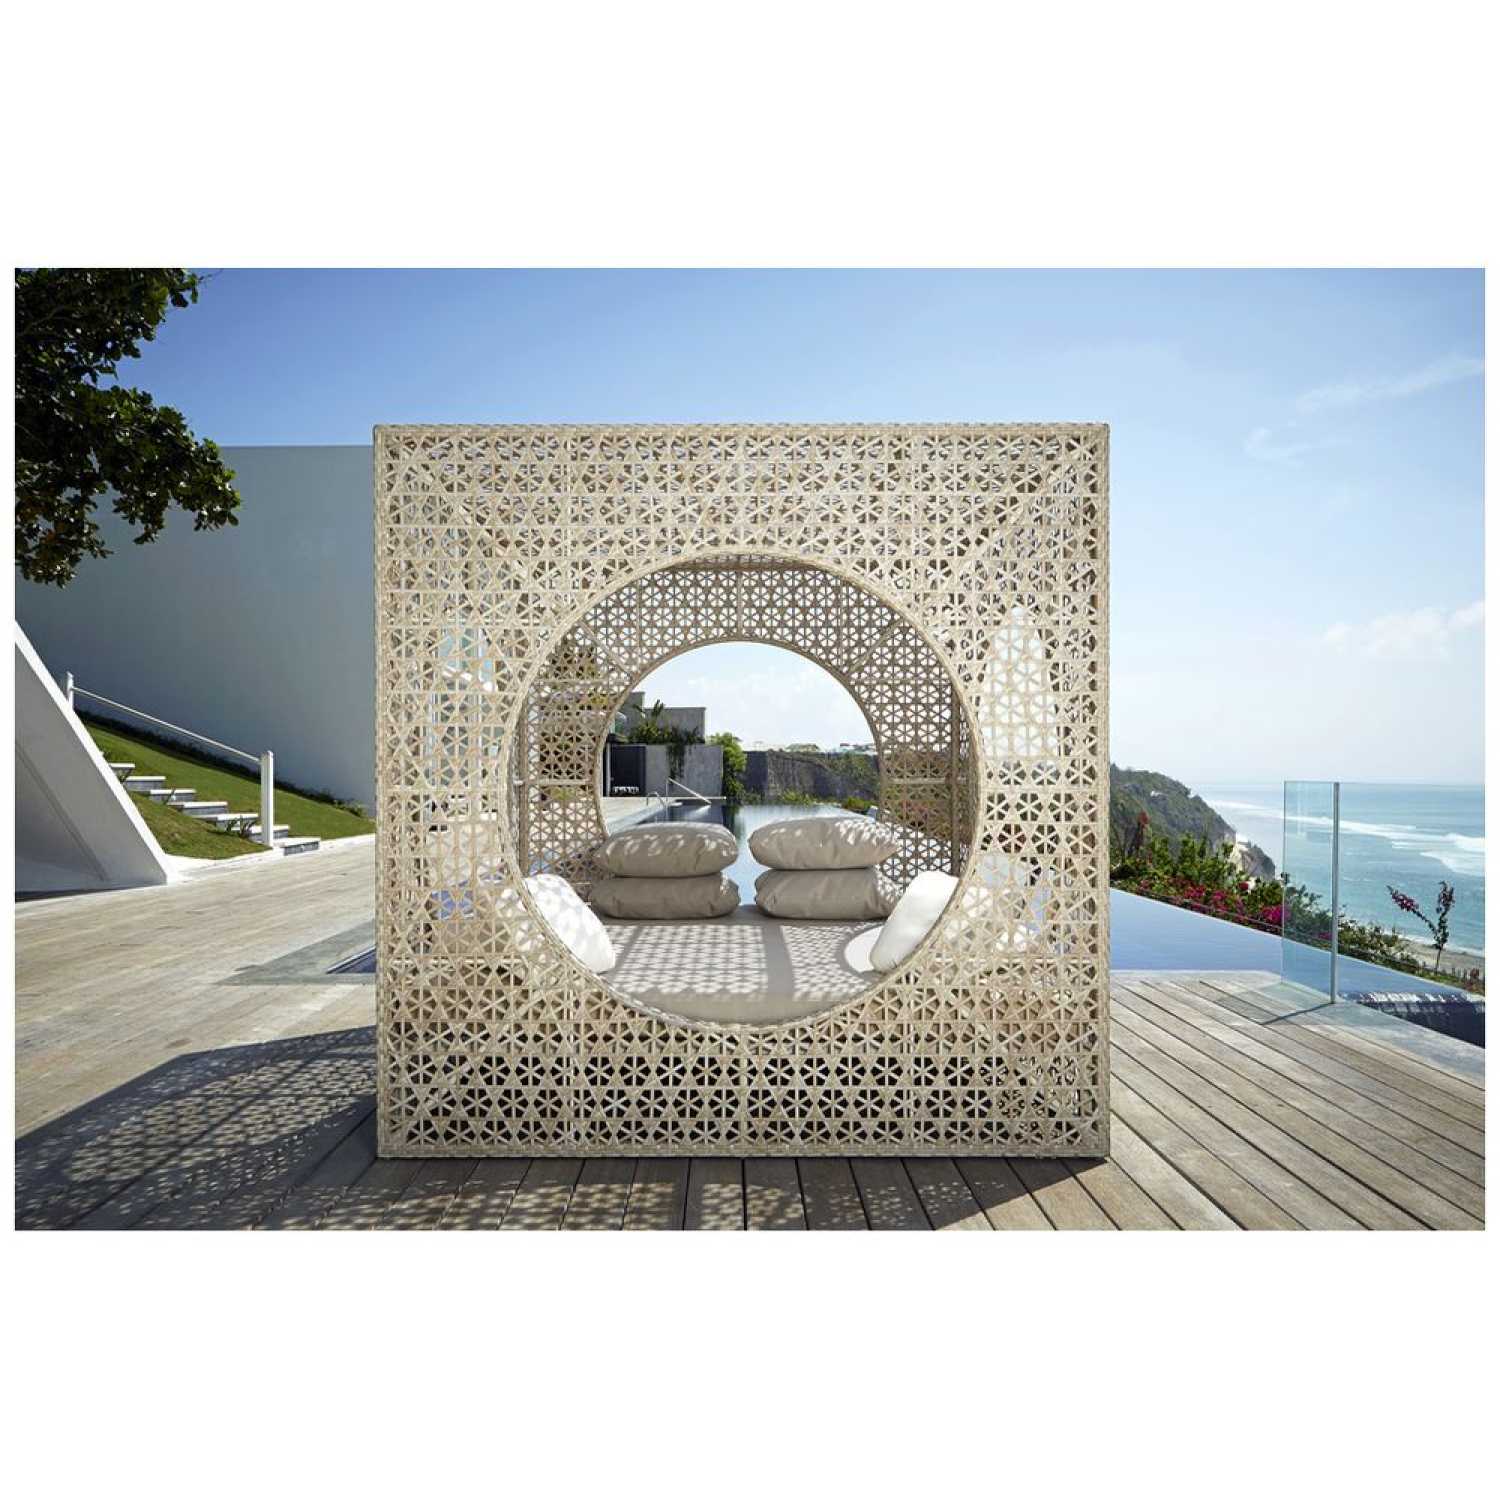 Cube Silver Walnut Daybed - PadioLiving - Cube Silver Walnut Daybed - Outdoor Daybed - PadioLiving